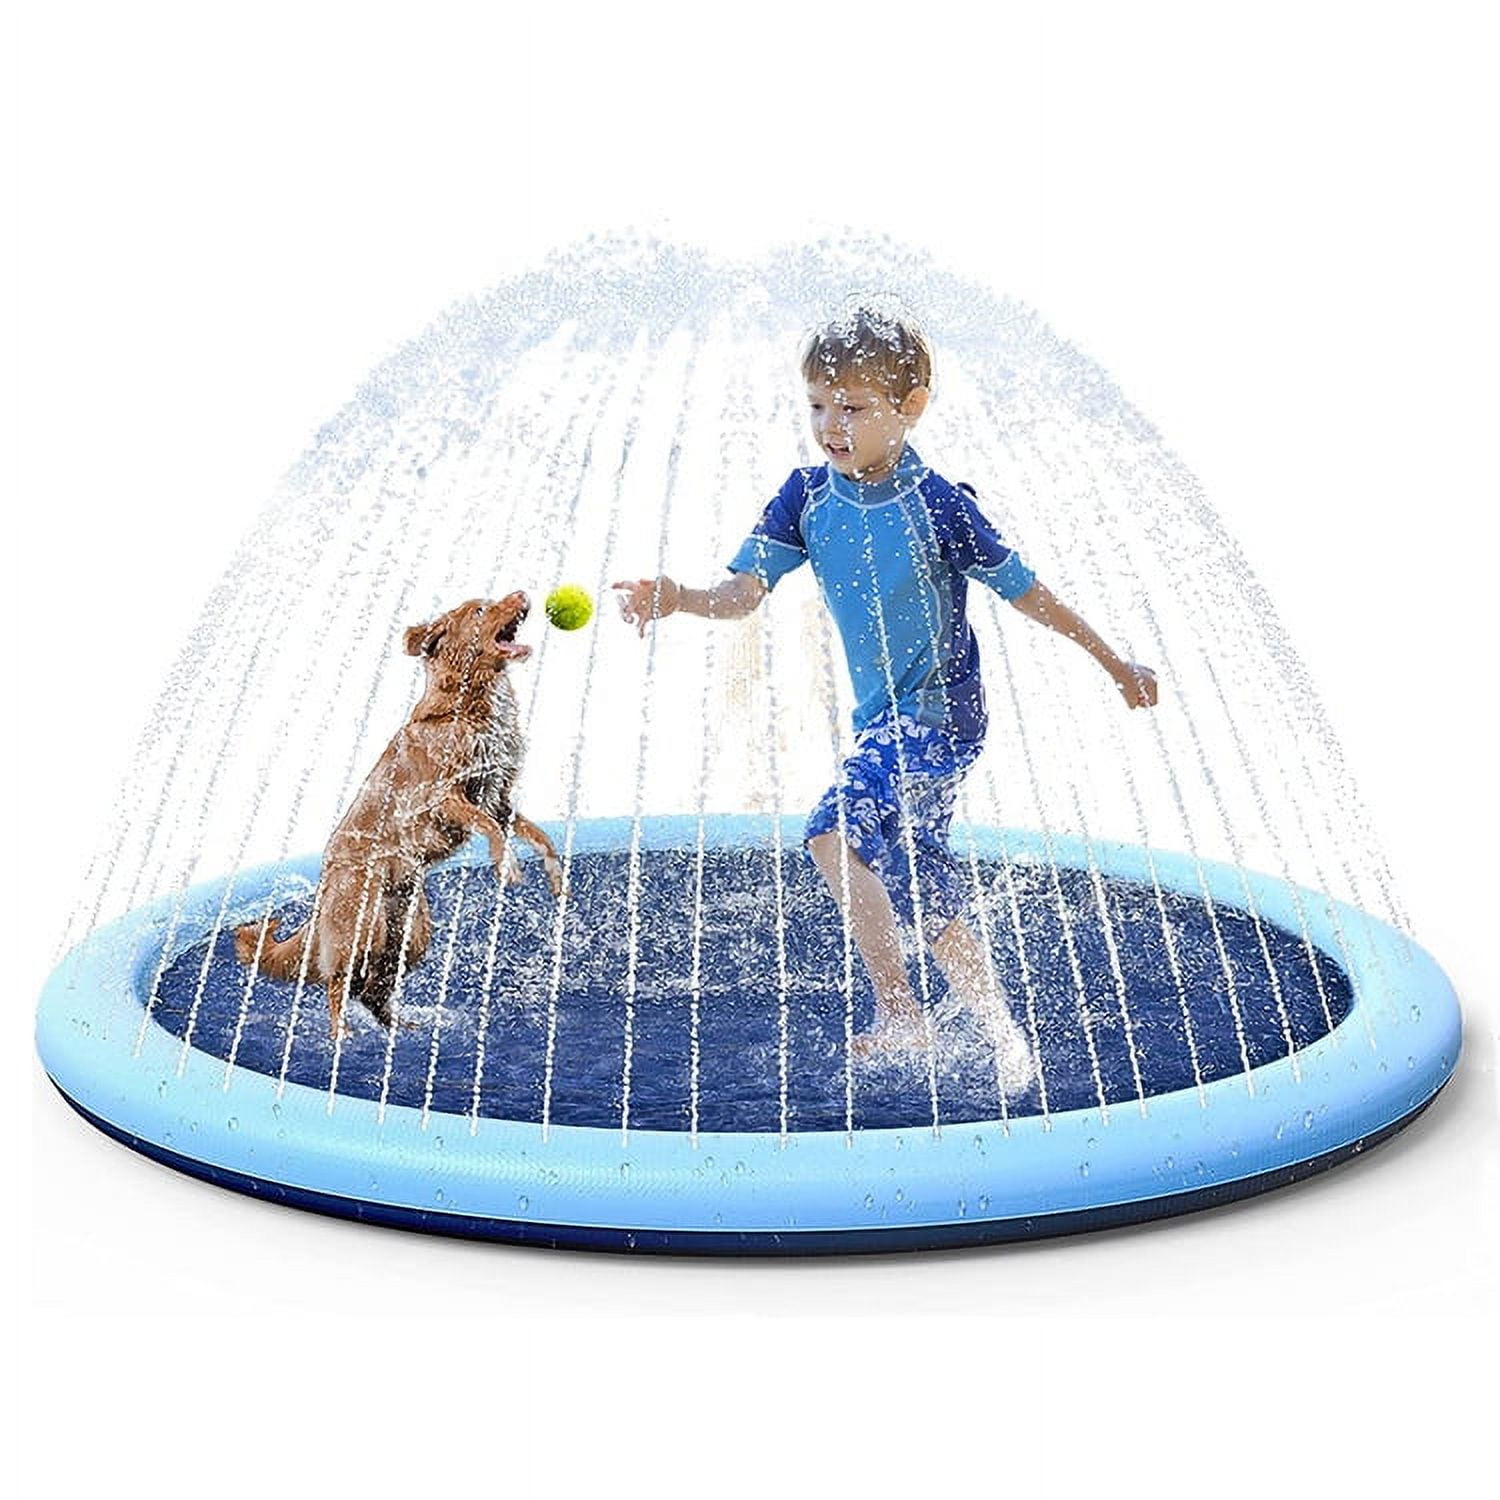 Inflatable Water Fountain Mat - TOYS TREAT